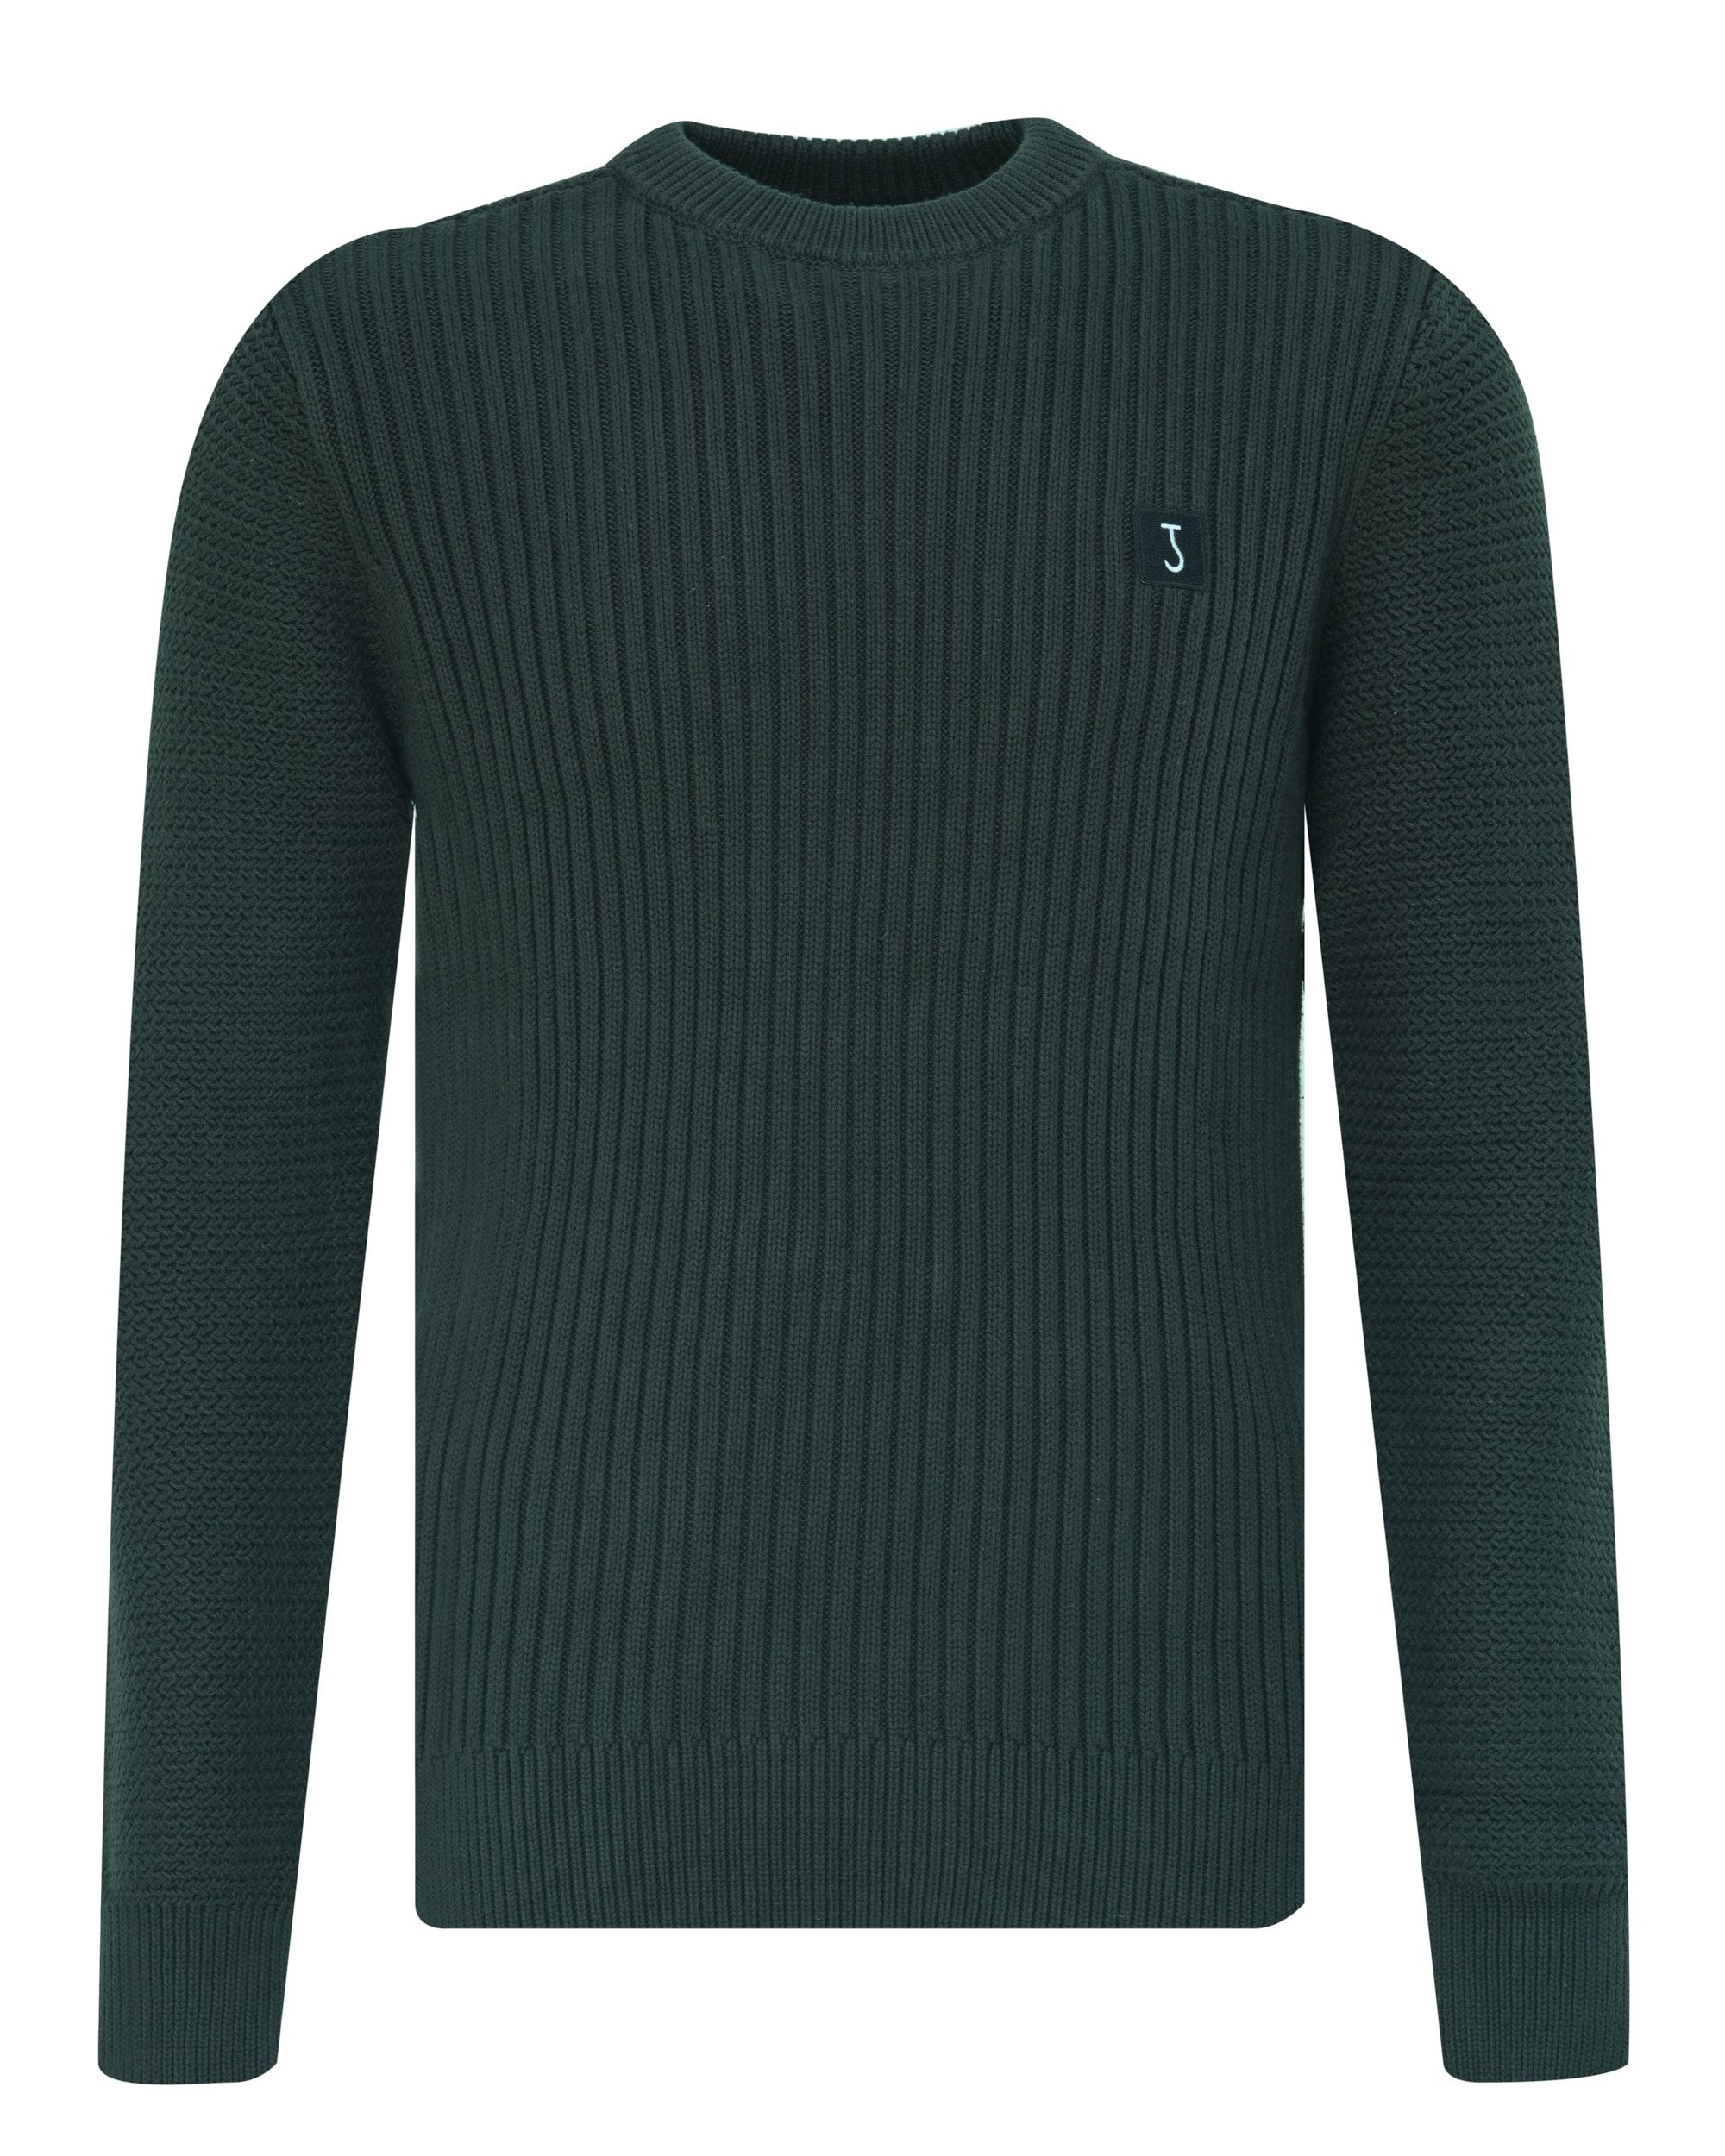 Butcher of Blue Ribbed Trui ronde hals  Donker groen 078908-001-L